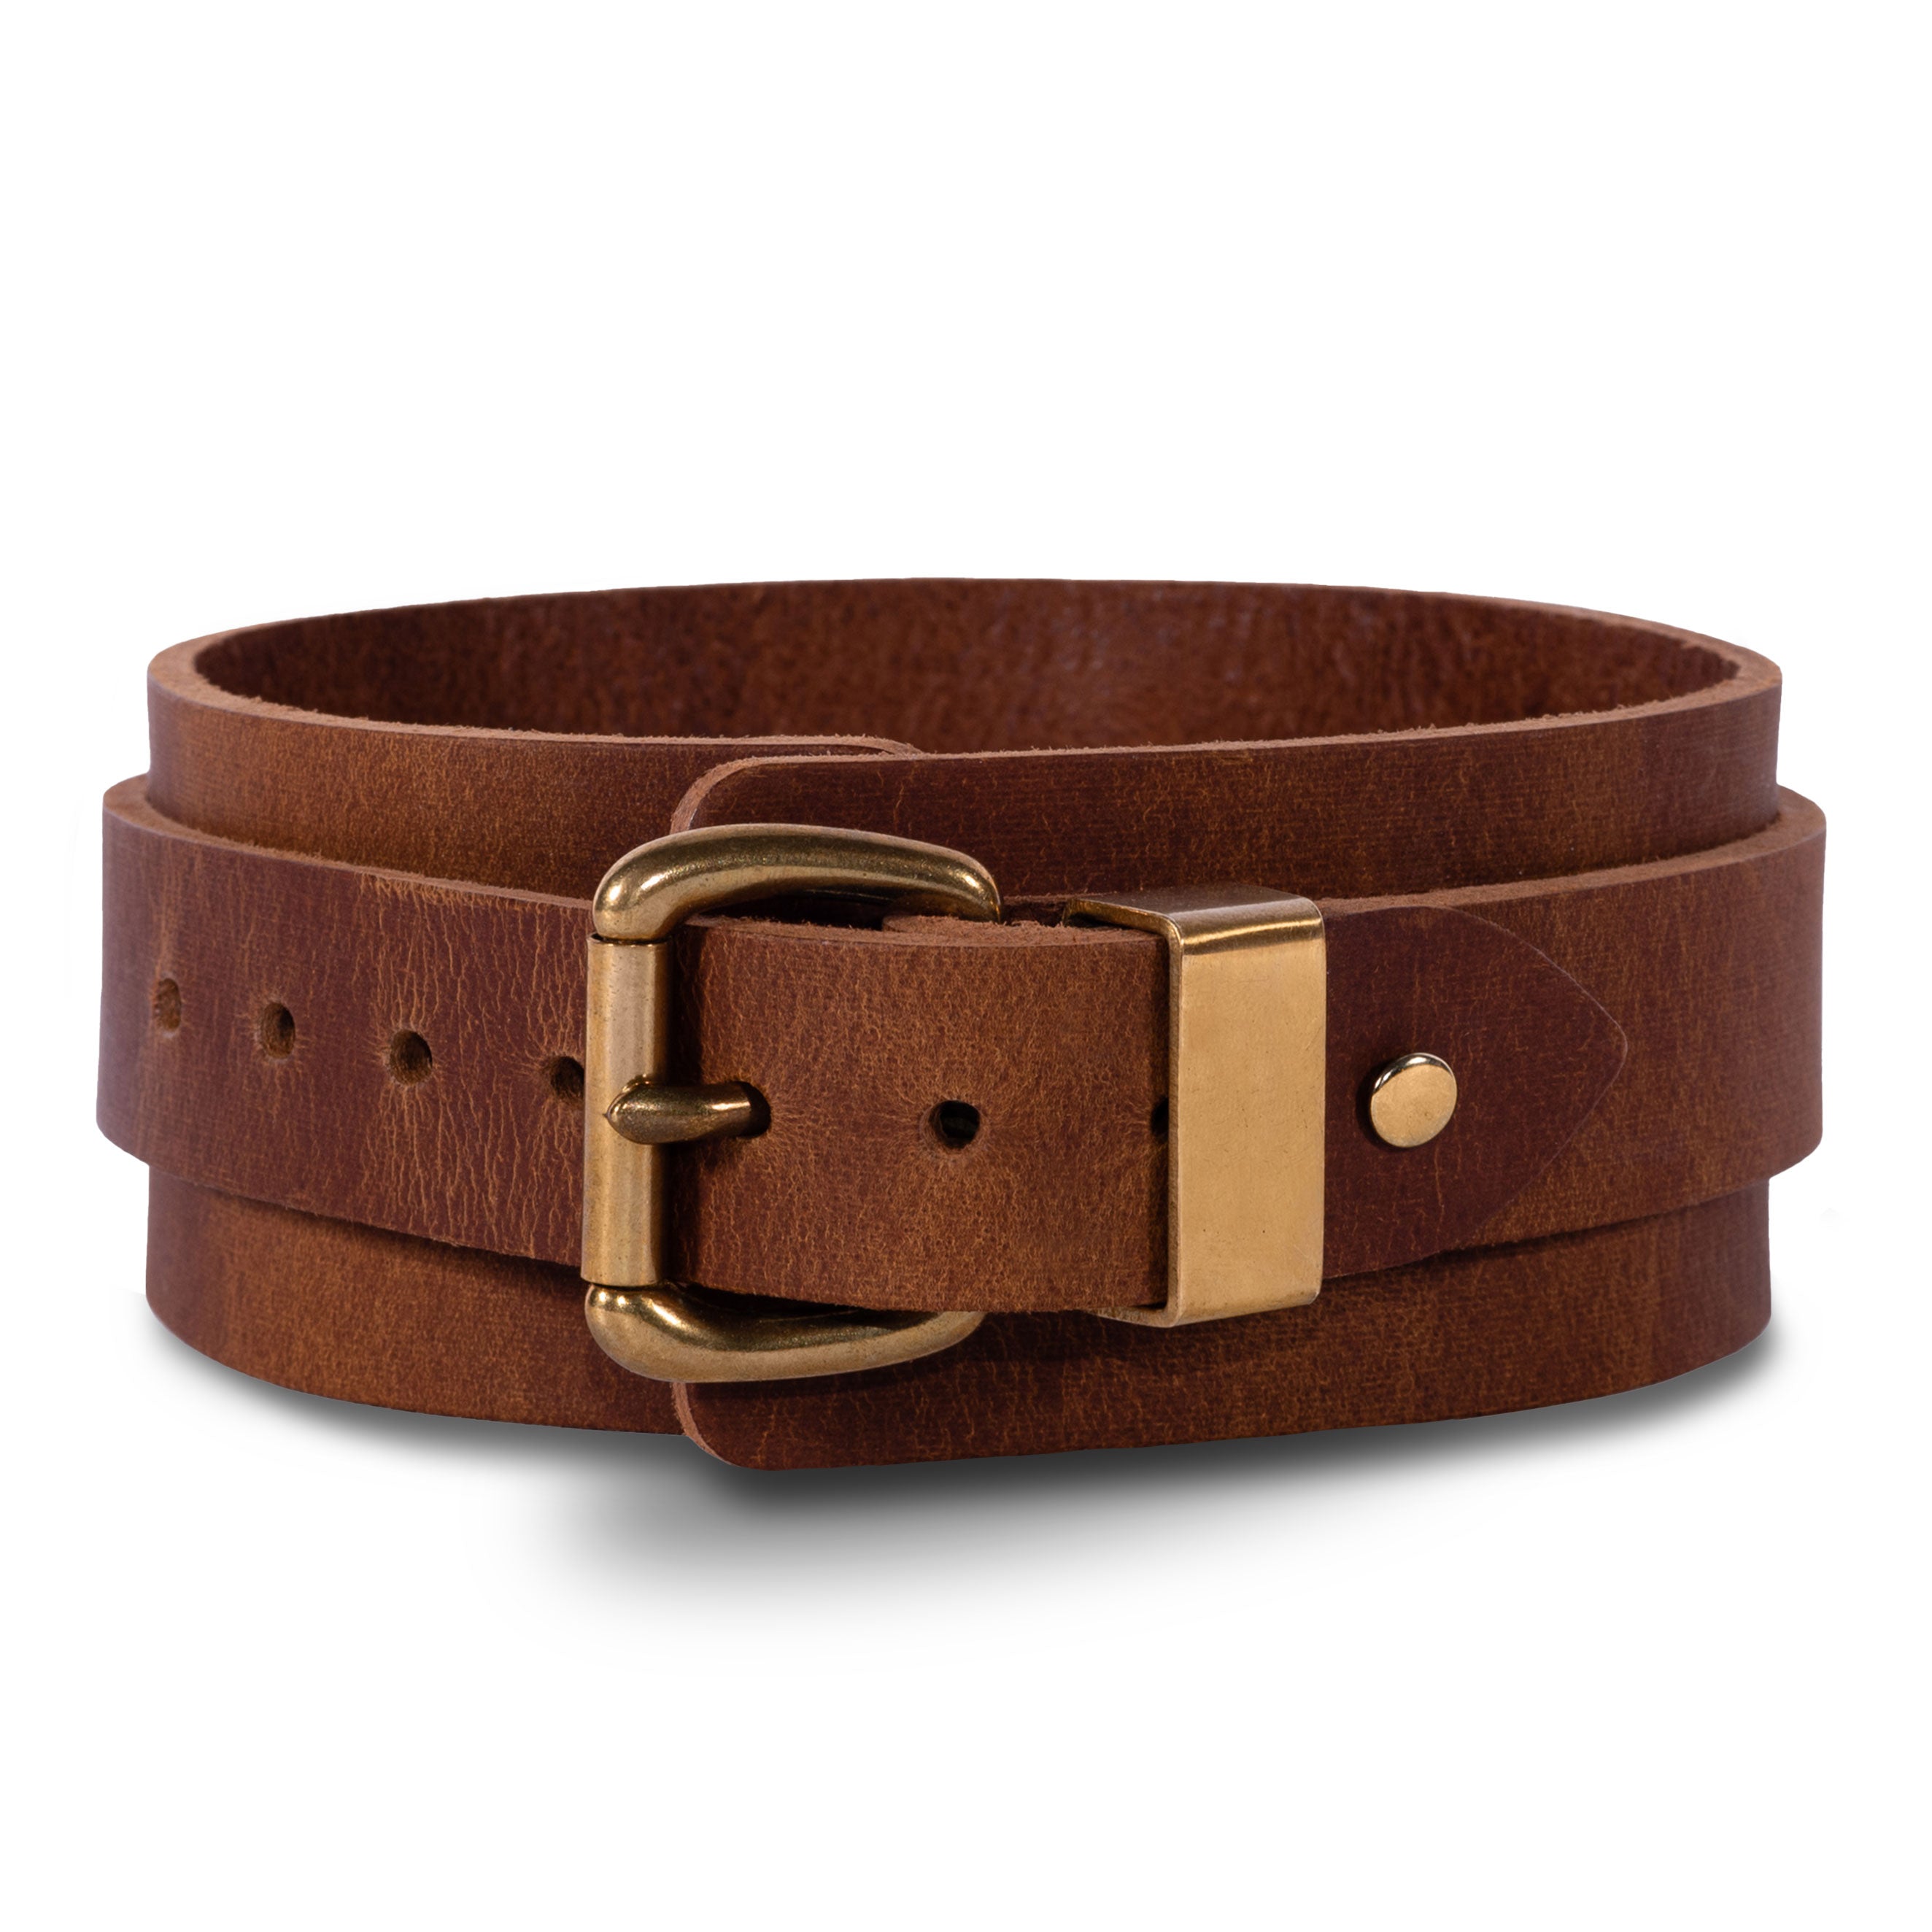 Luxury Brown Leather Nickel-Free BDSM Collar with Solid Brass Buckle